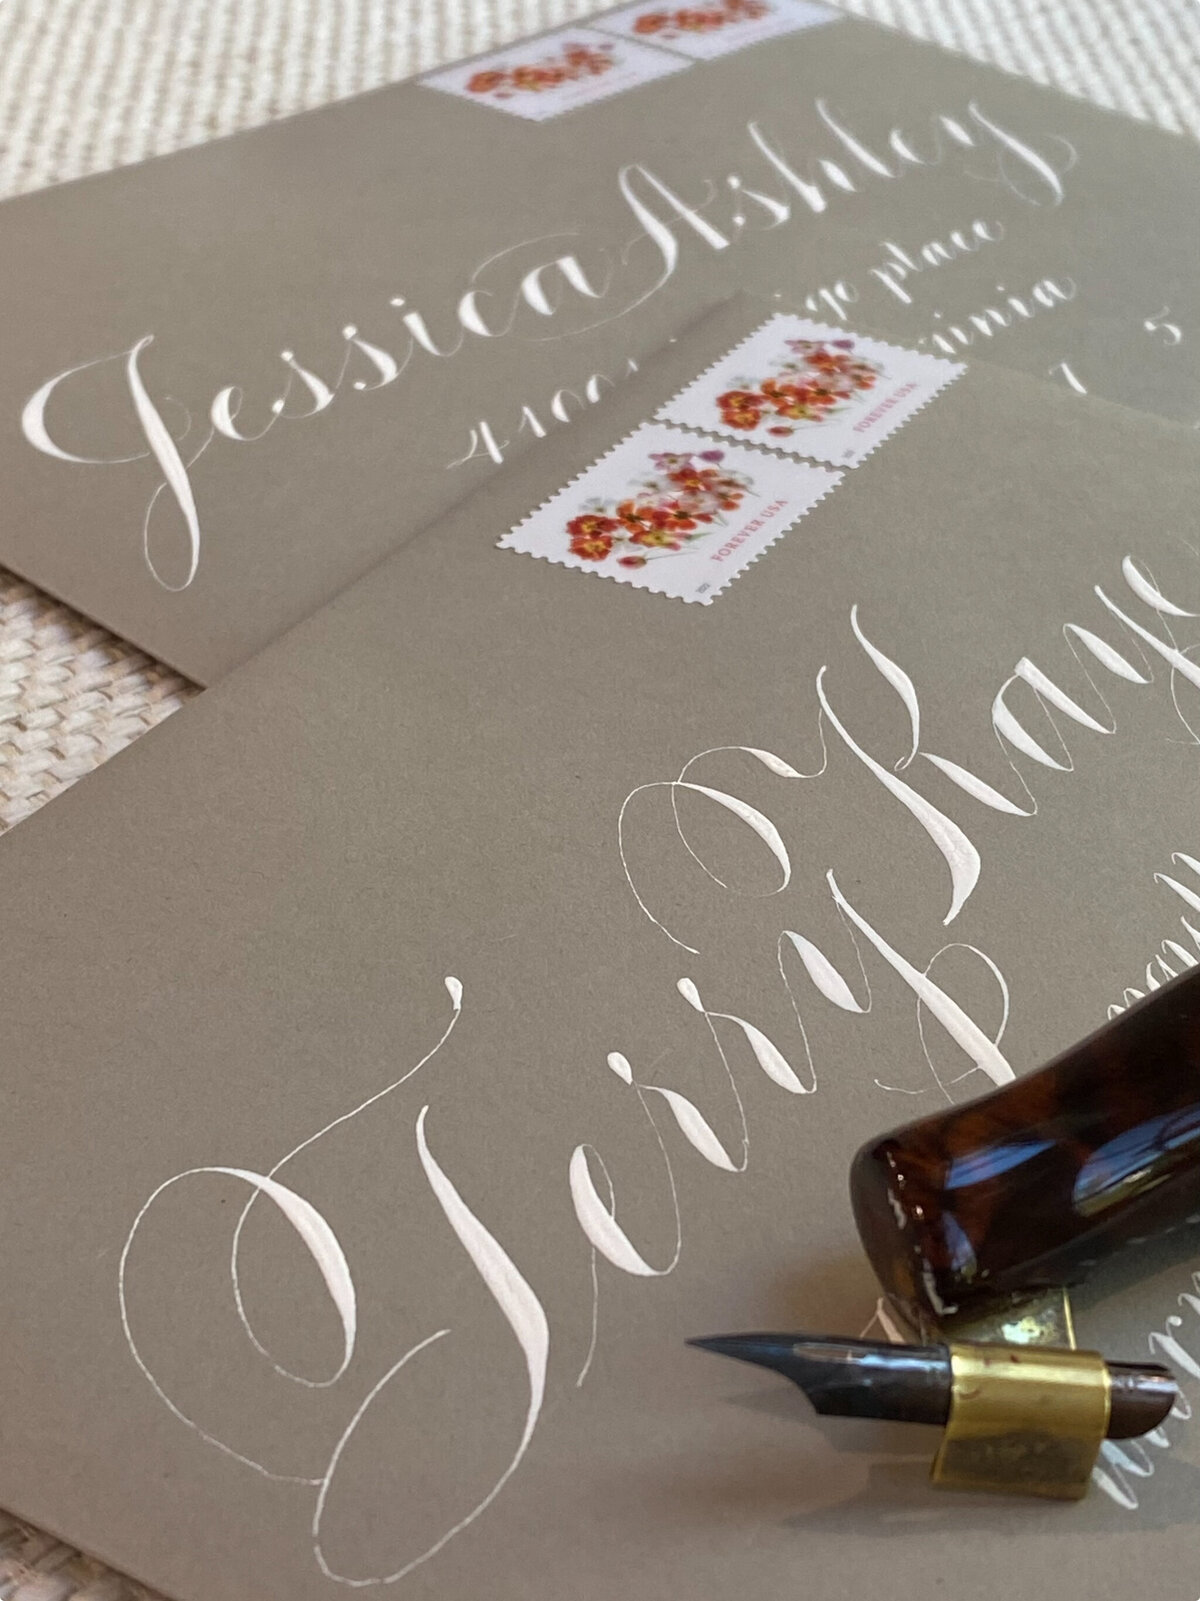 Custom calligraphy in an envelope with stamps